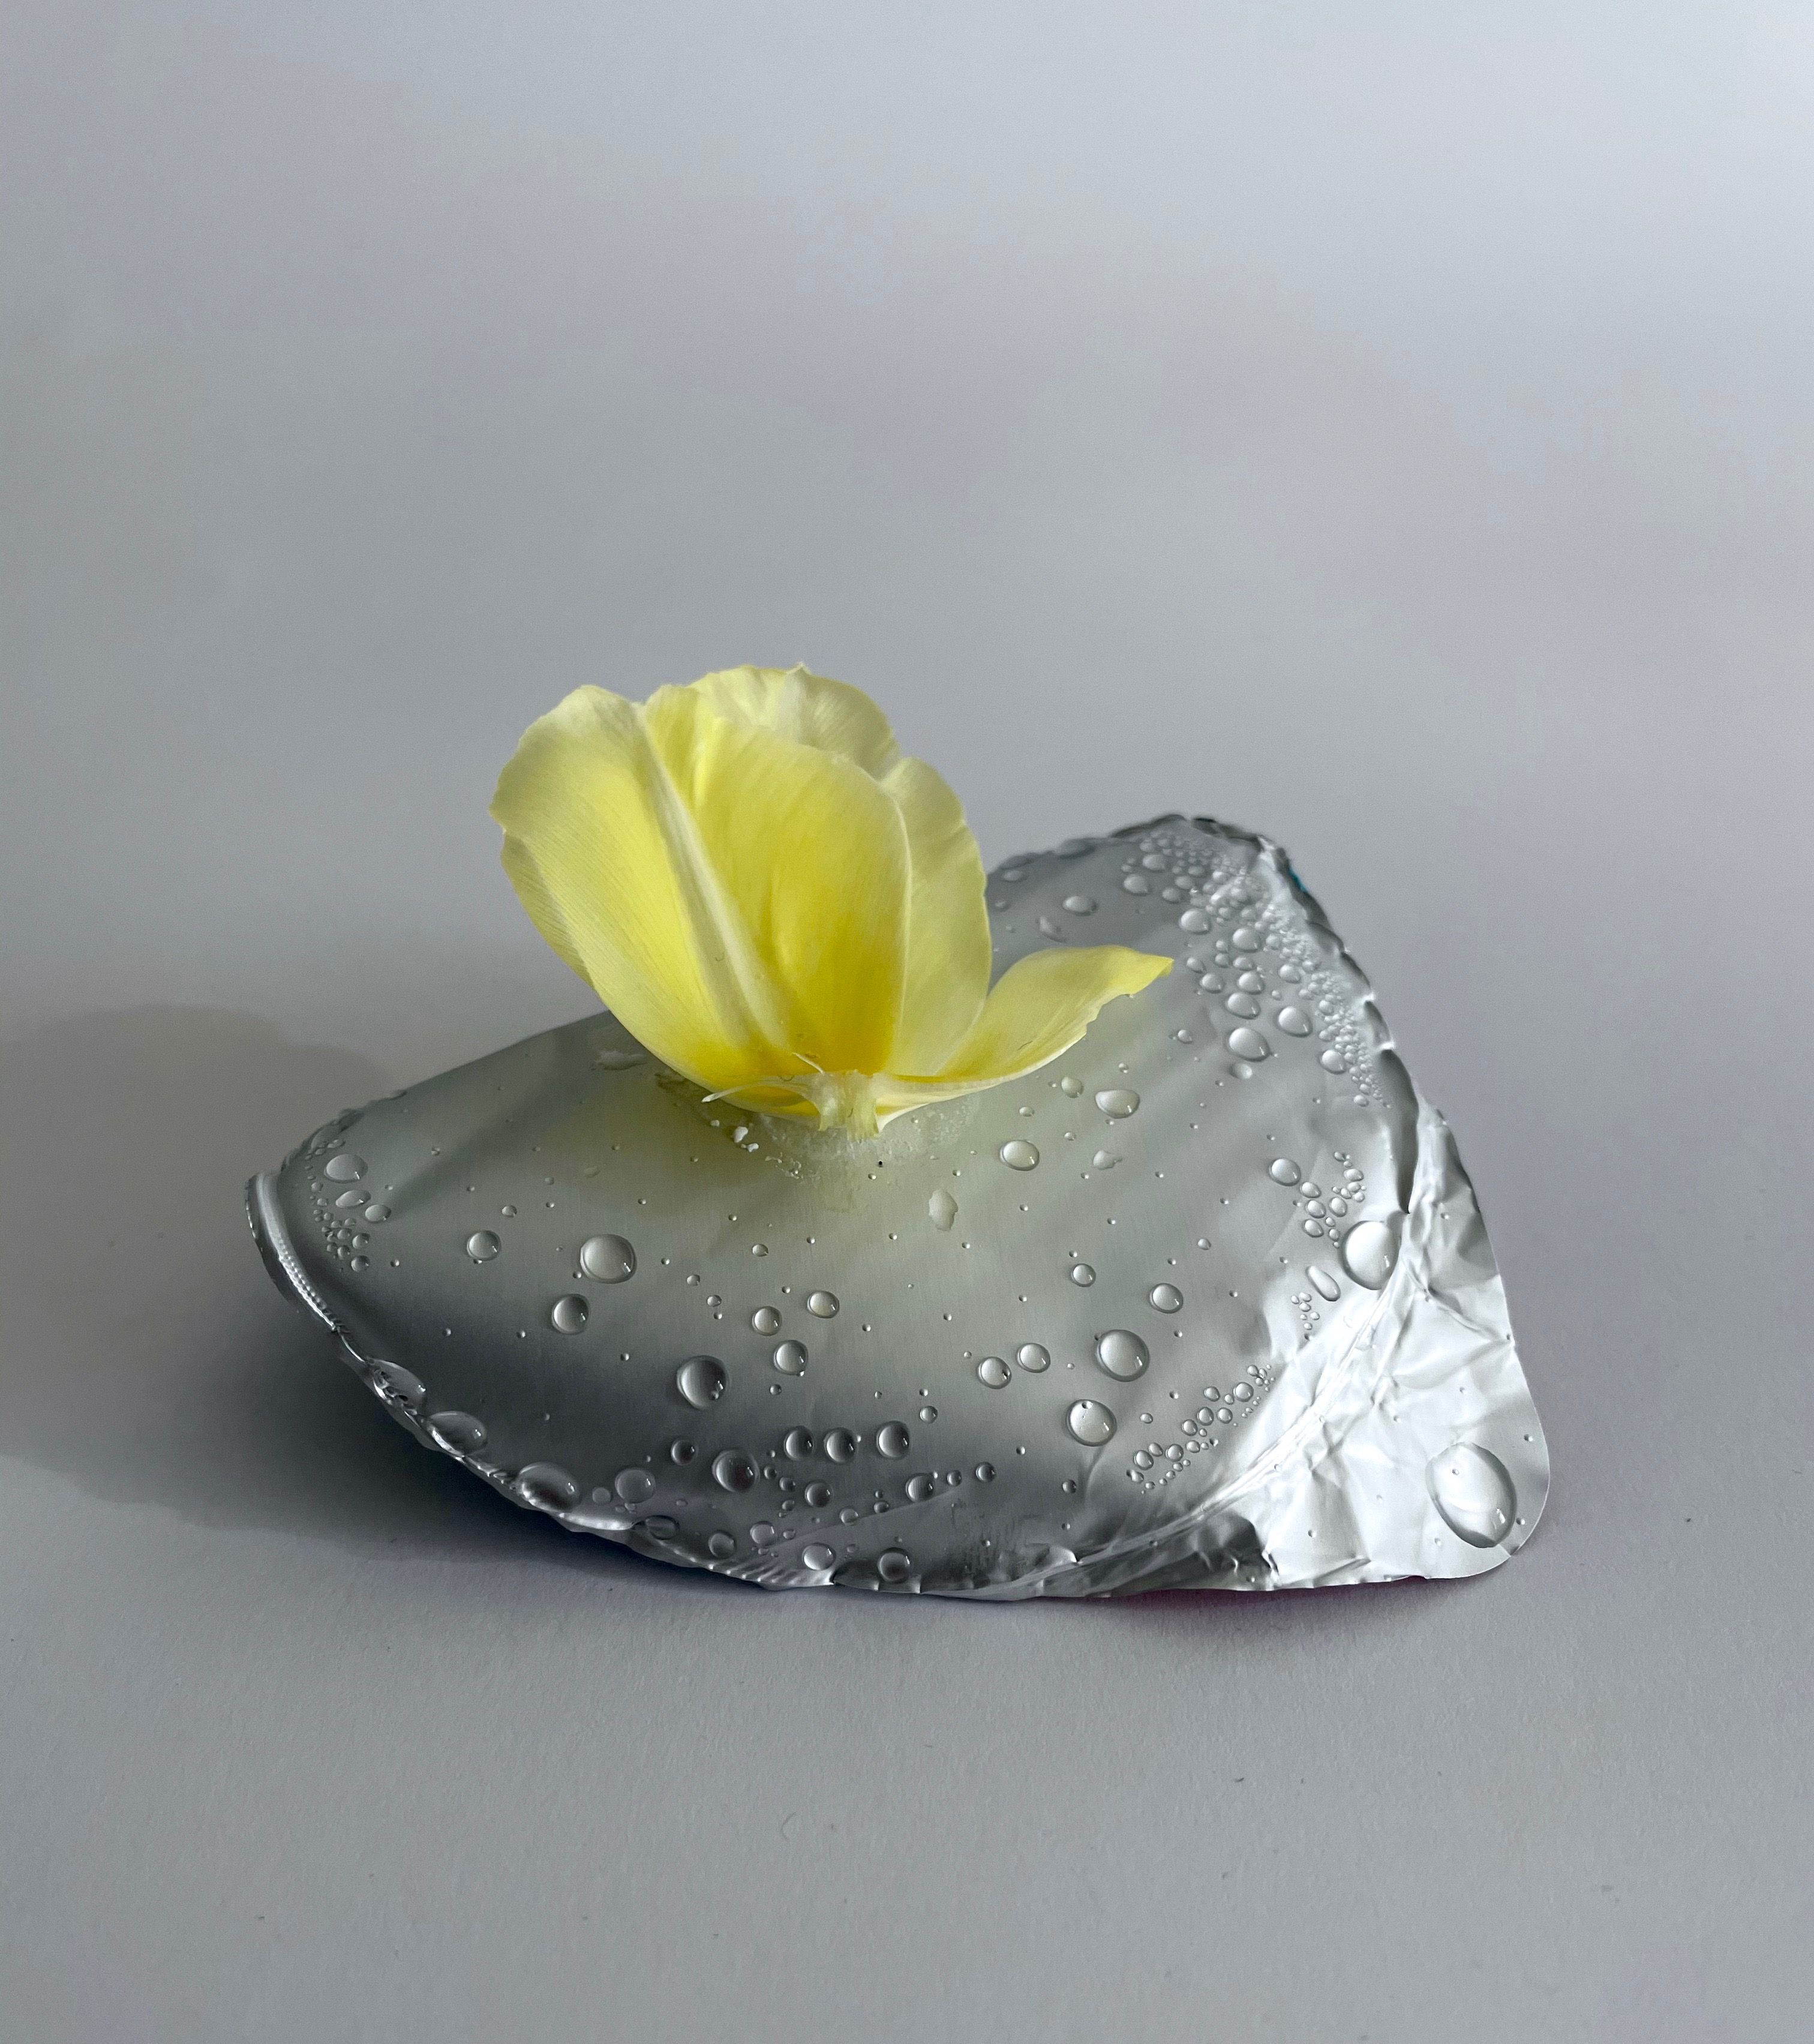 Tulip blossom laying on a yogurt lid with condensation drops